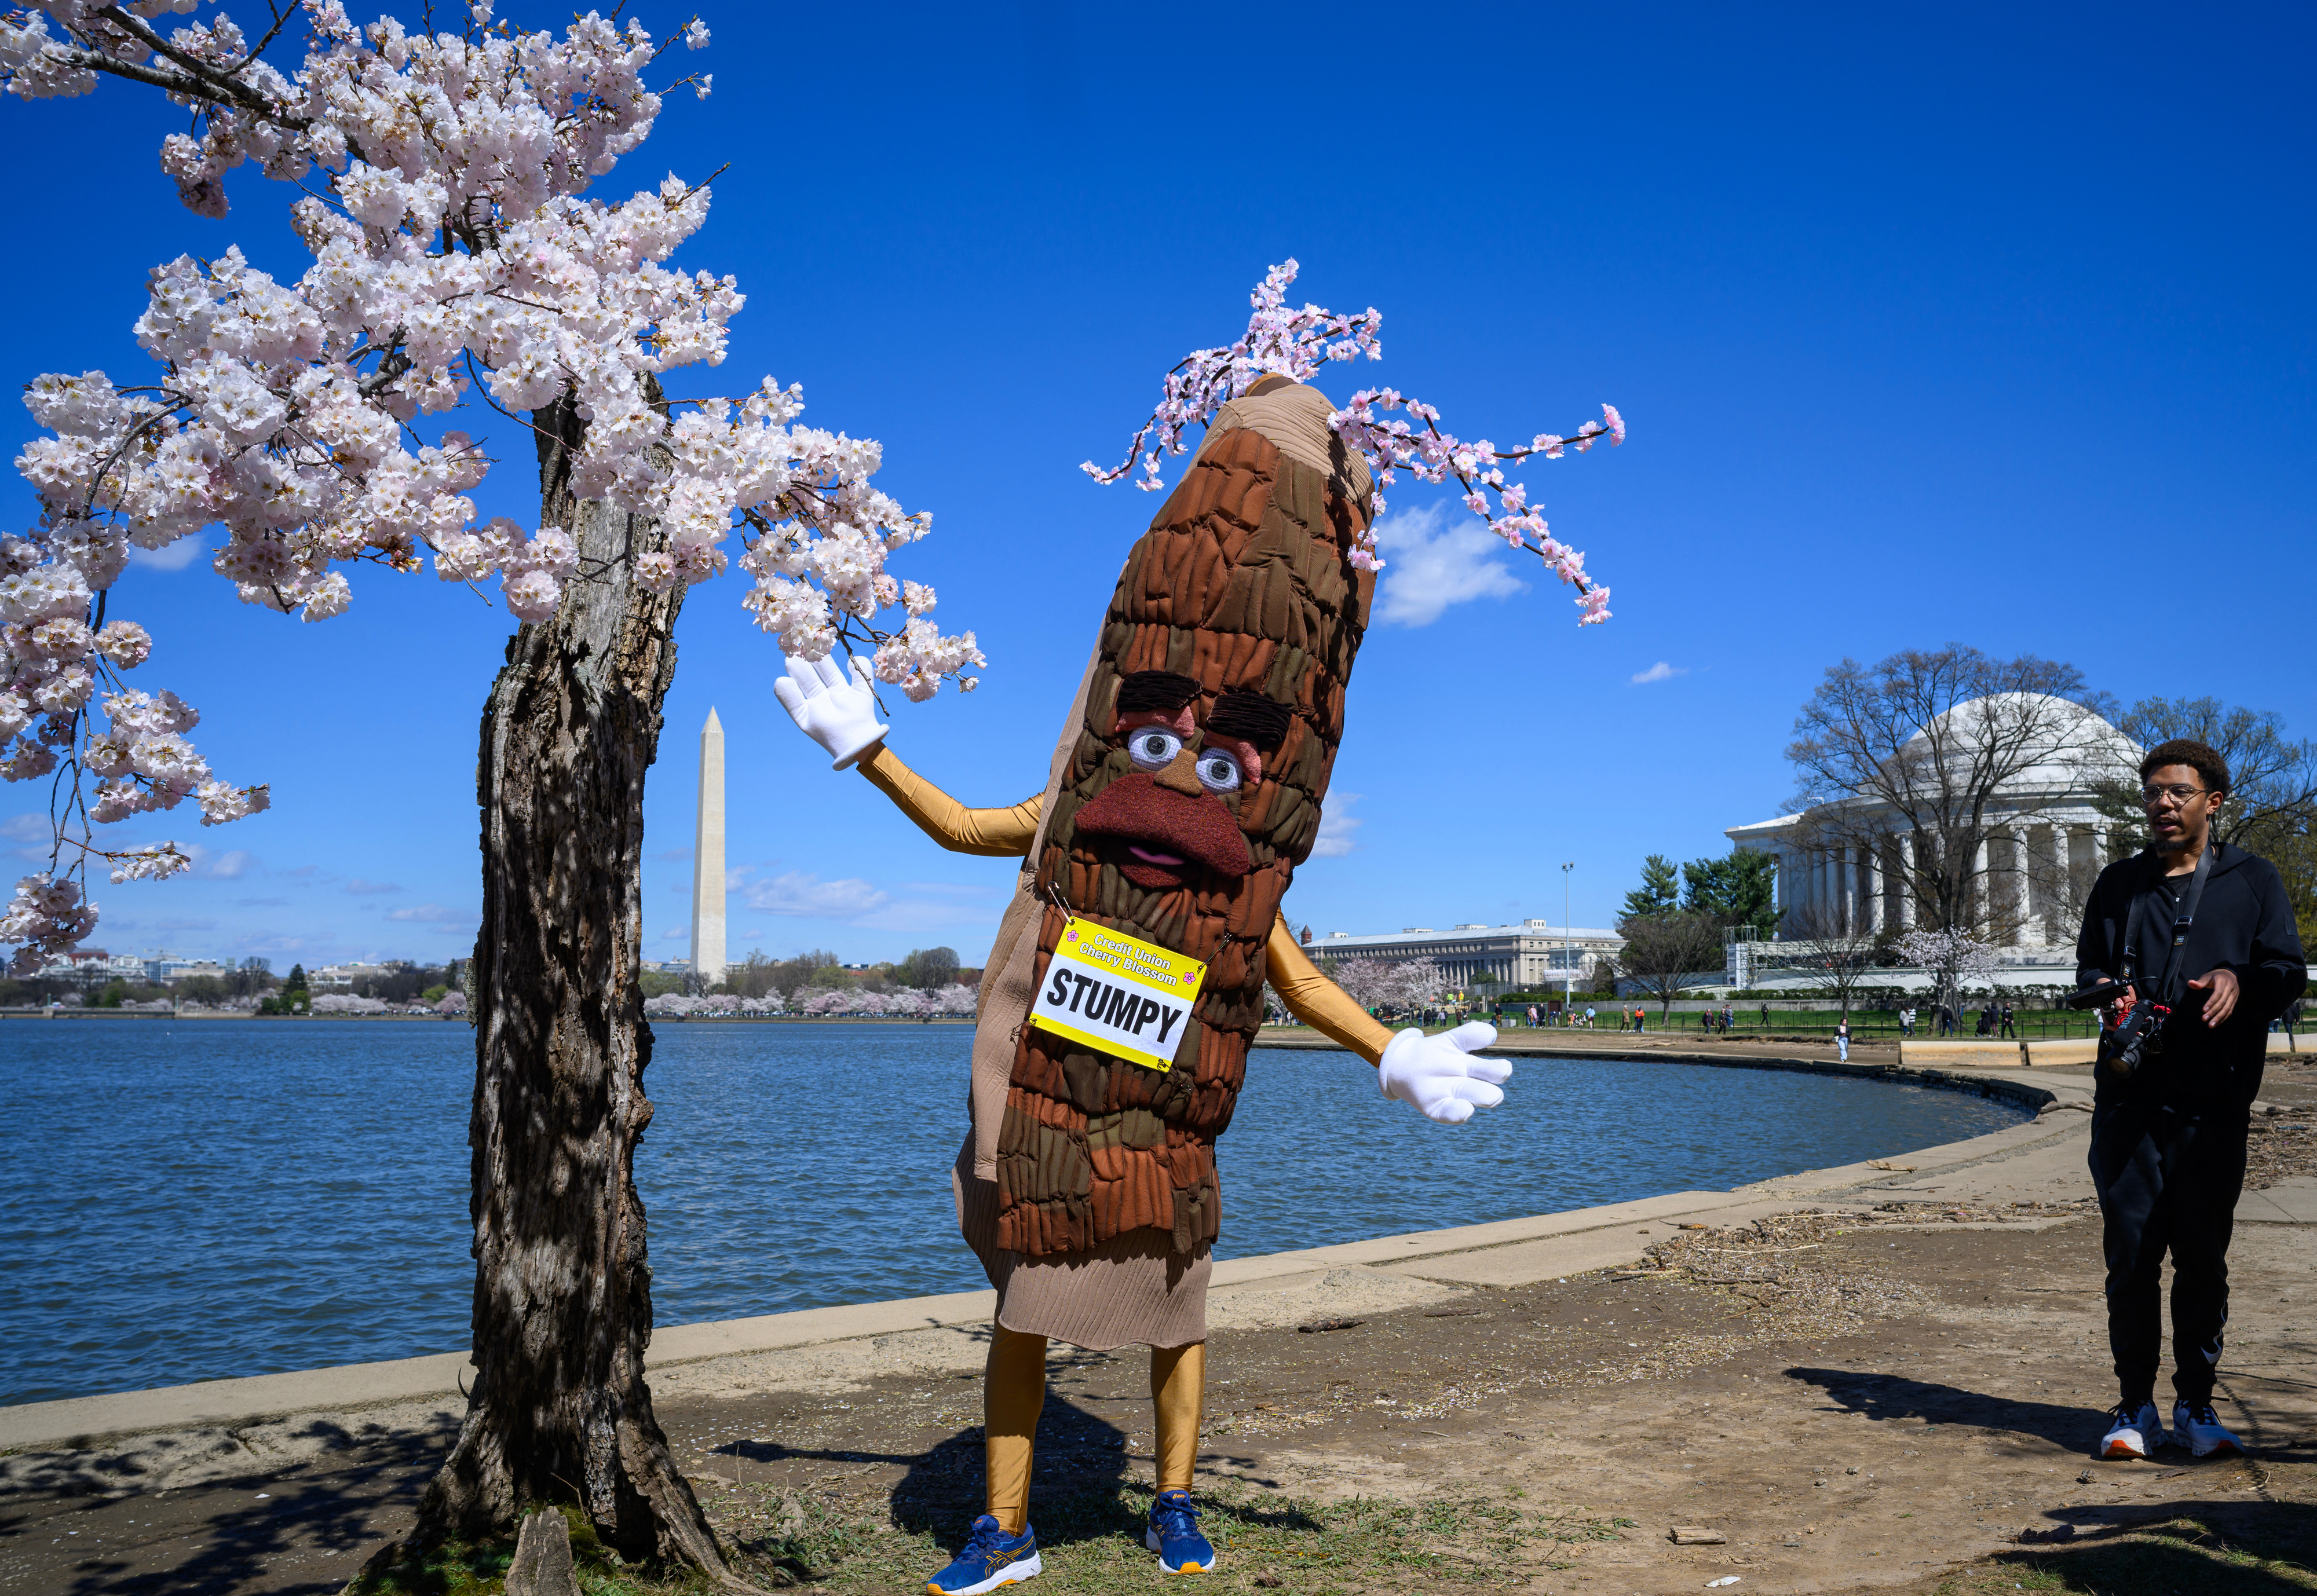 Person in a tree costume named &quot;Stumpy&quot; standing by cherry blossoms with another individual walking by